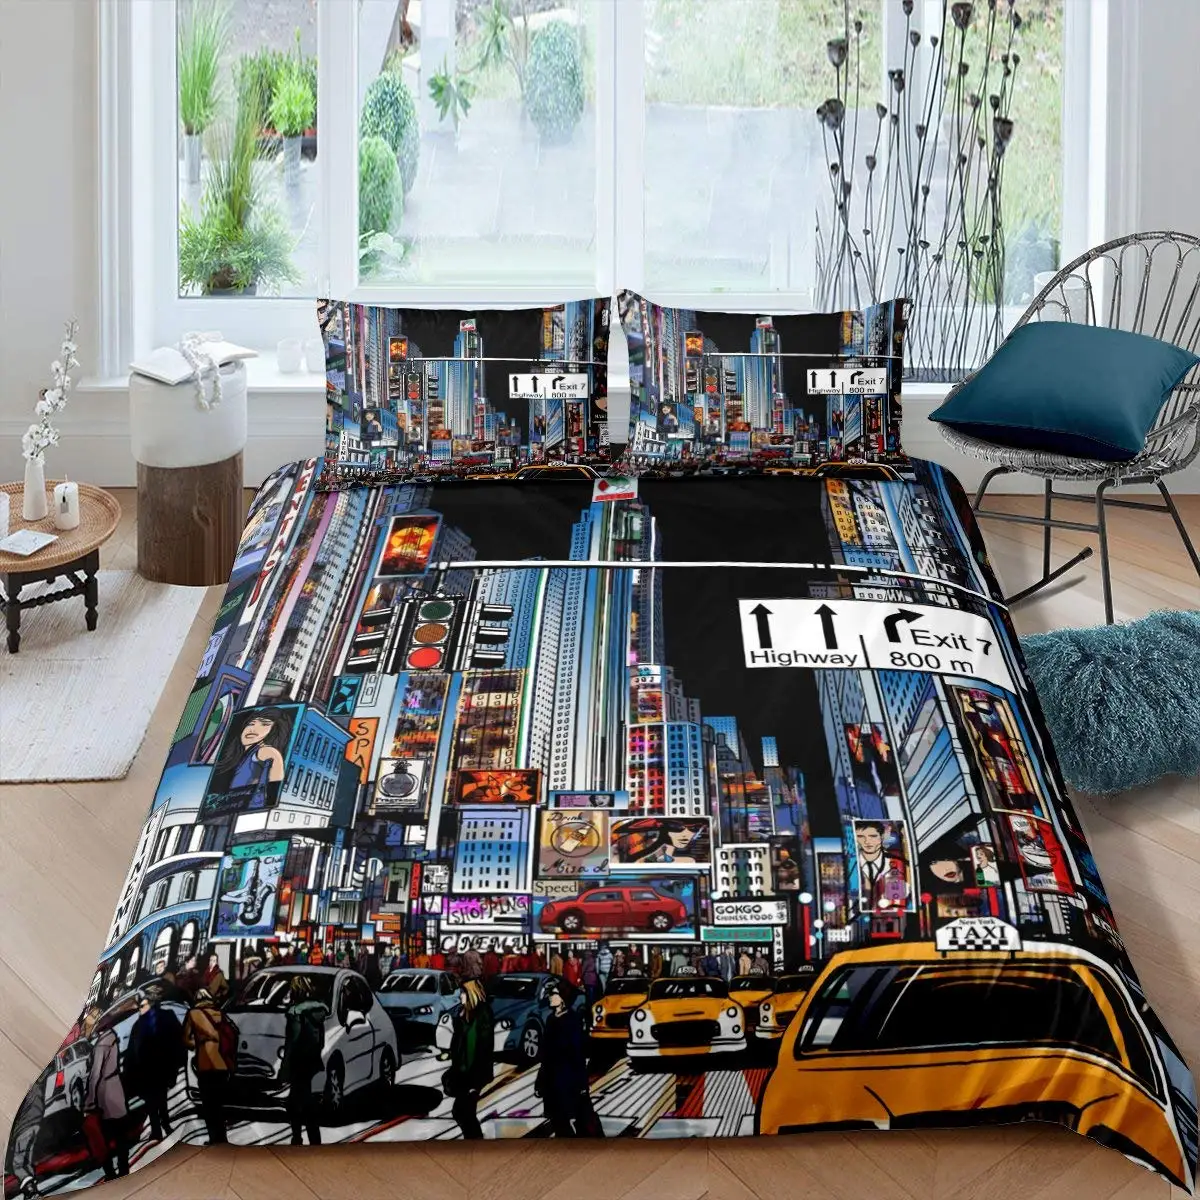 

Cityscape Duvet Cover Set New York City Night View Quilt Cover for Boys Adults Microfiber Building Bedding Set 2/3Pcs King Size